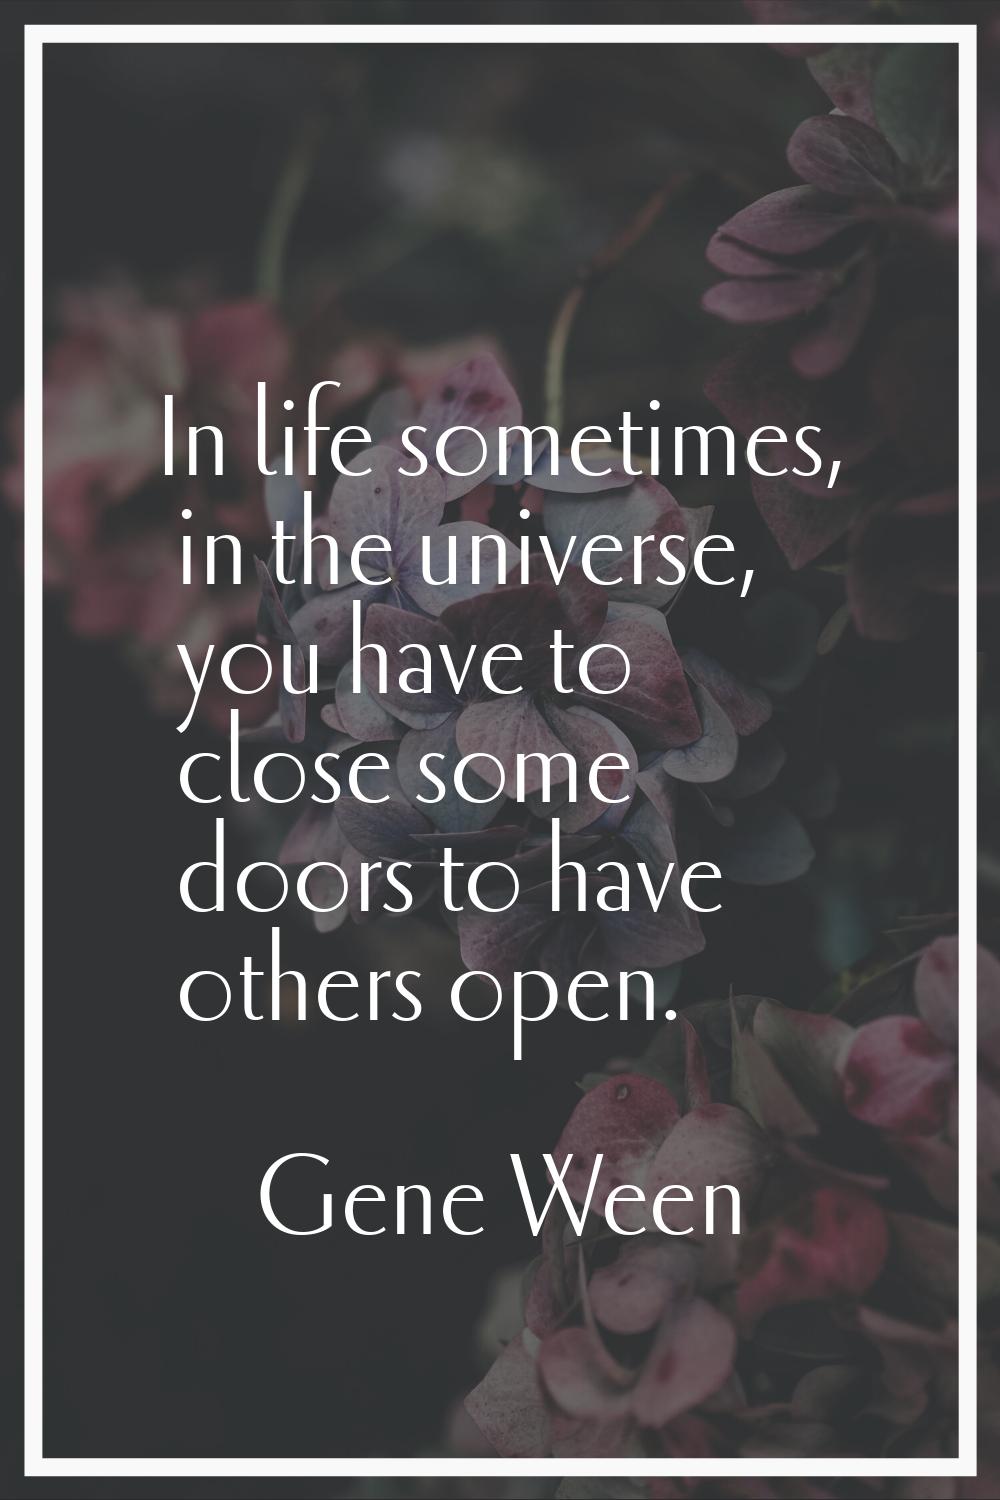 In life sometimes, in the universe, you have to close some doors to have others open.